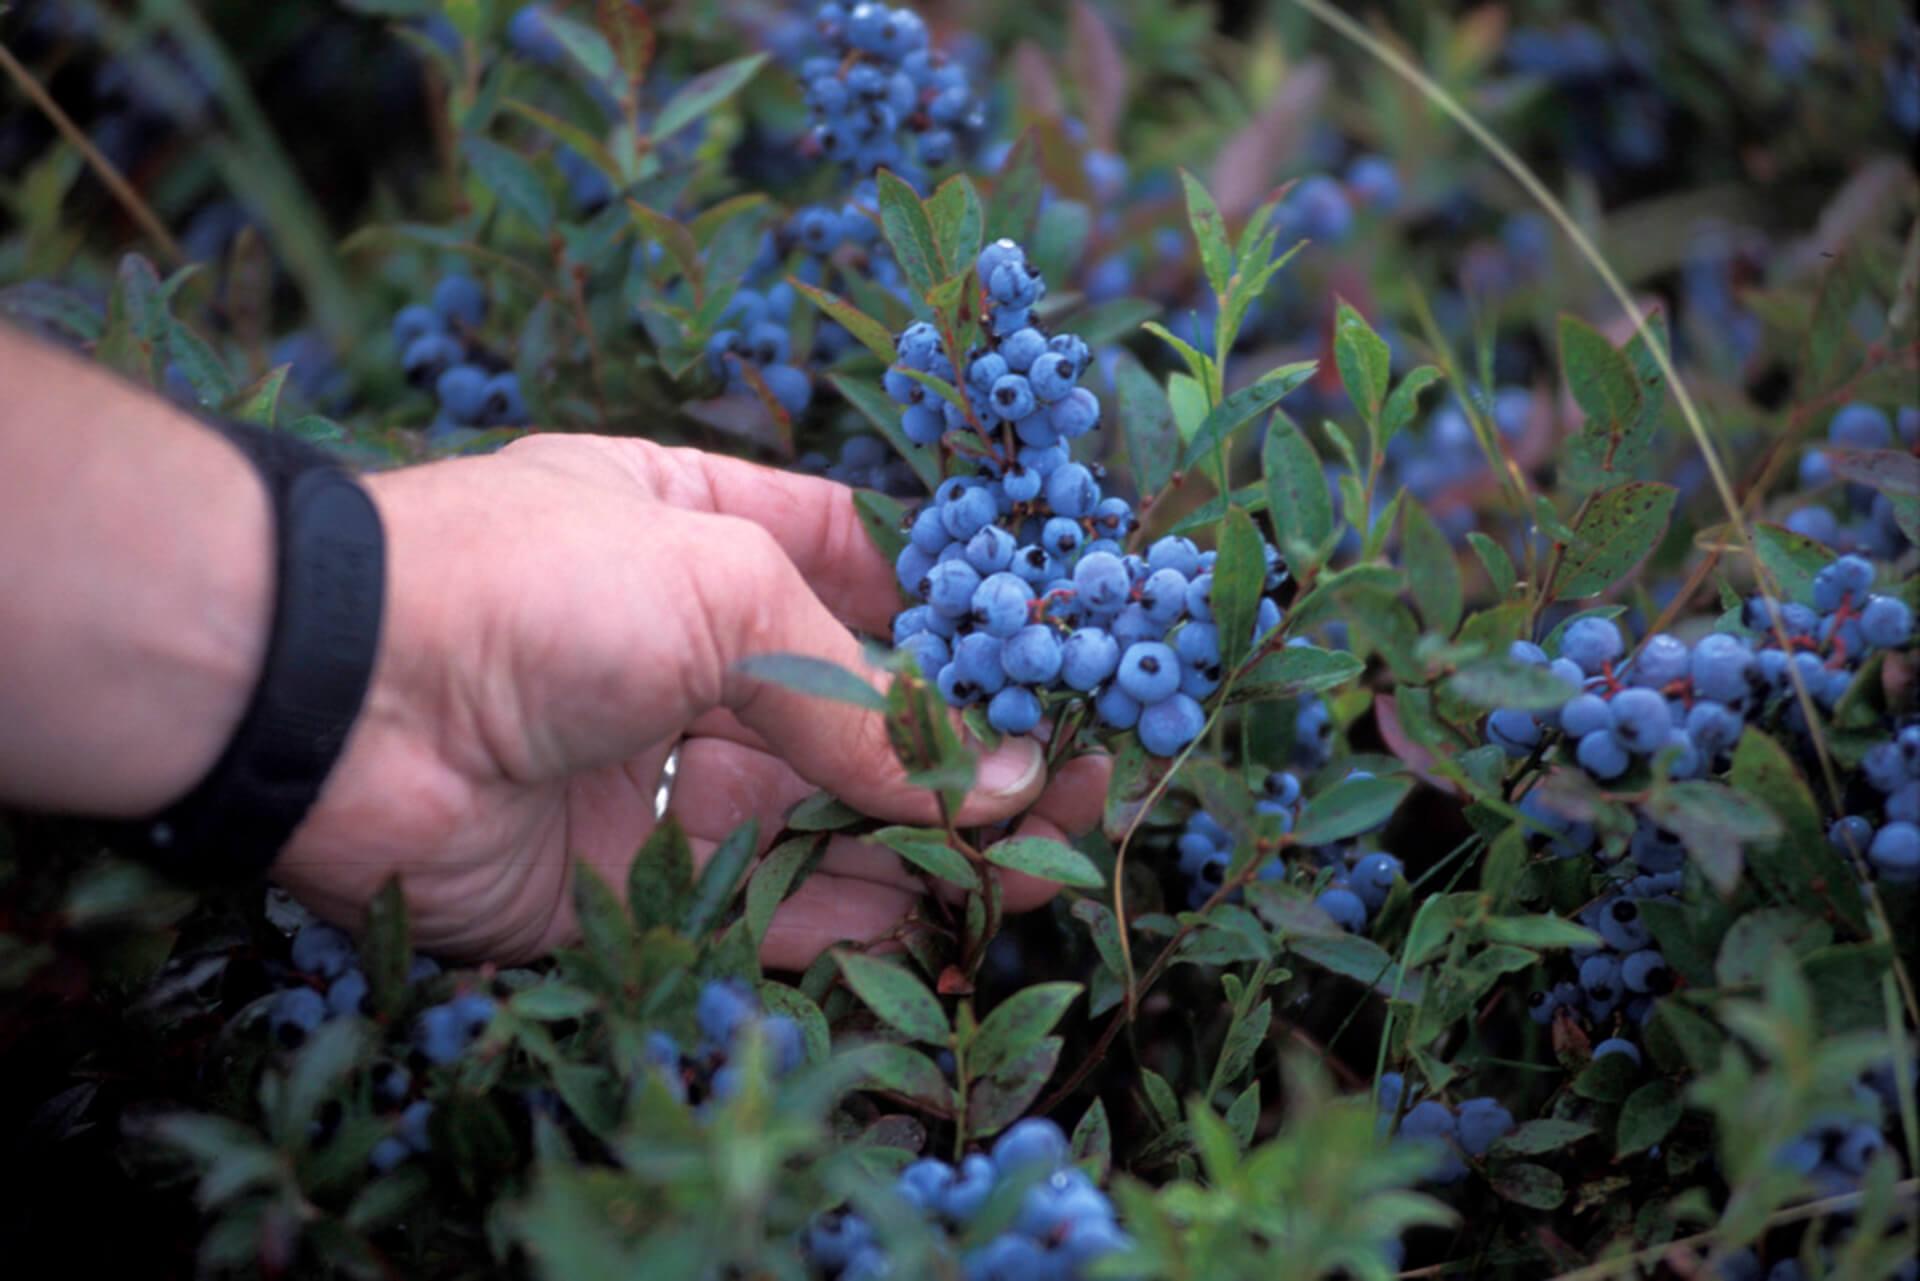 Hand holding a bushel of blueberries on a blueberry bush